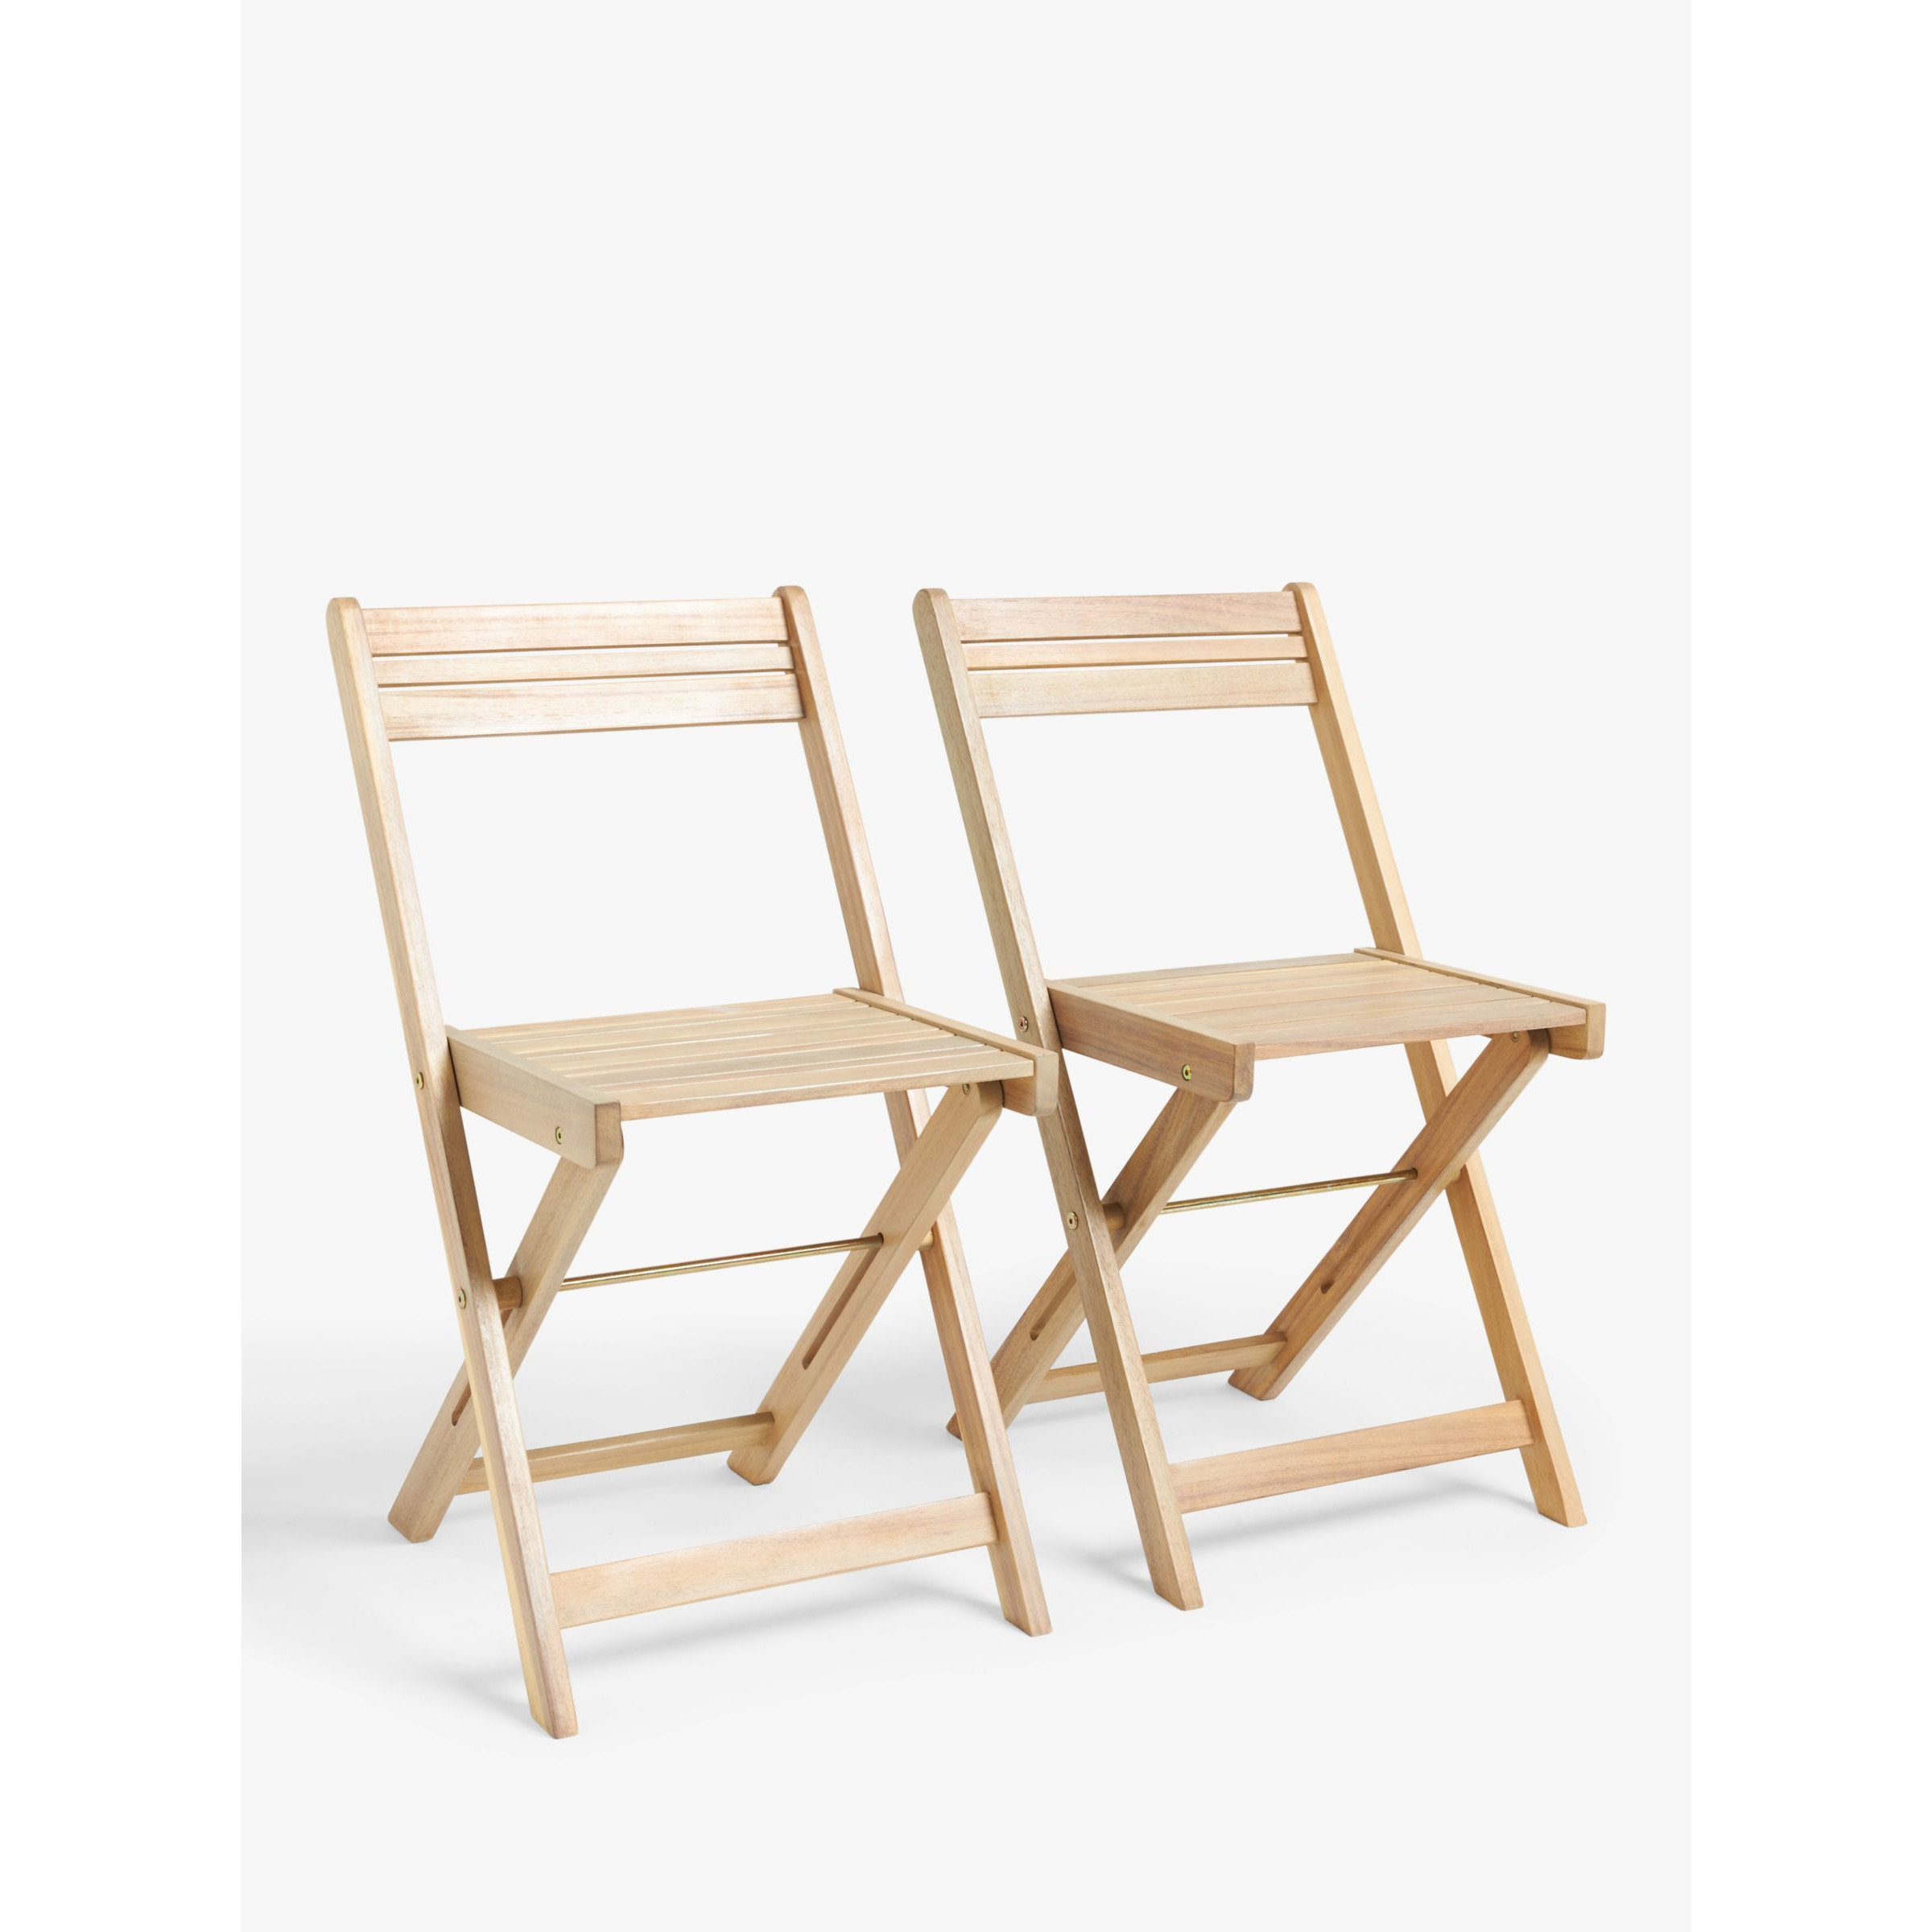 John Lewis ANYDAY Acacia Wood Foldable Garden Dining Chairs, Set of 2, Natural - image 1